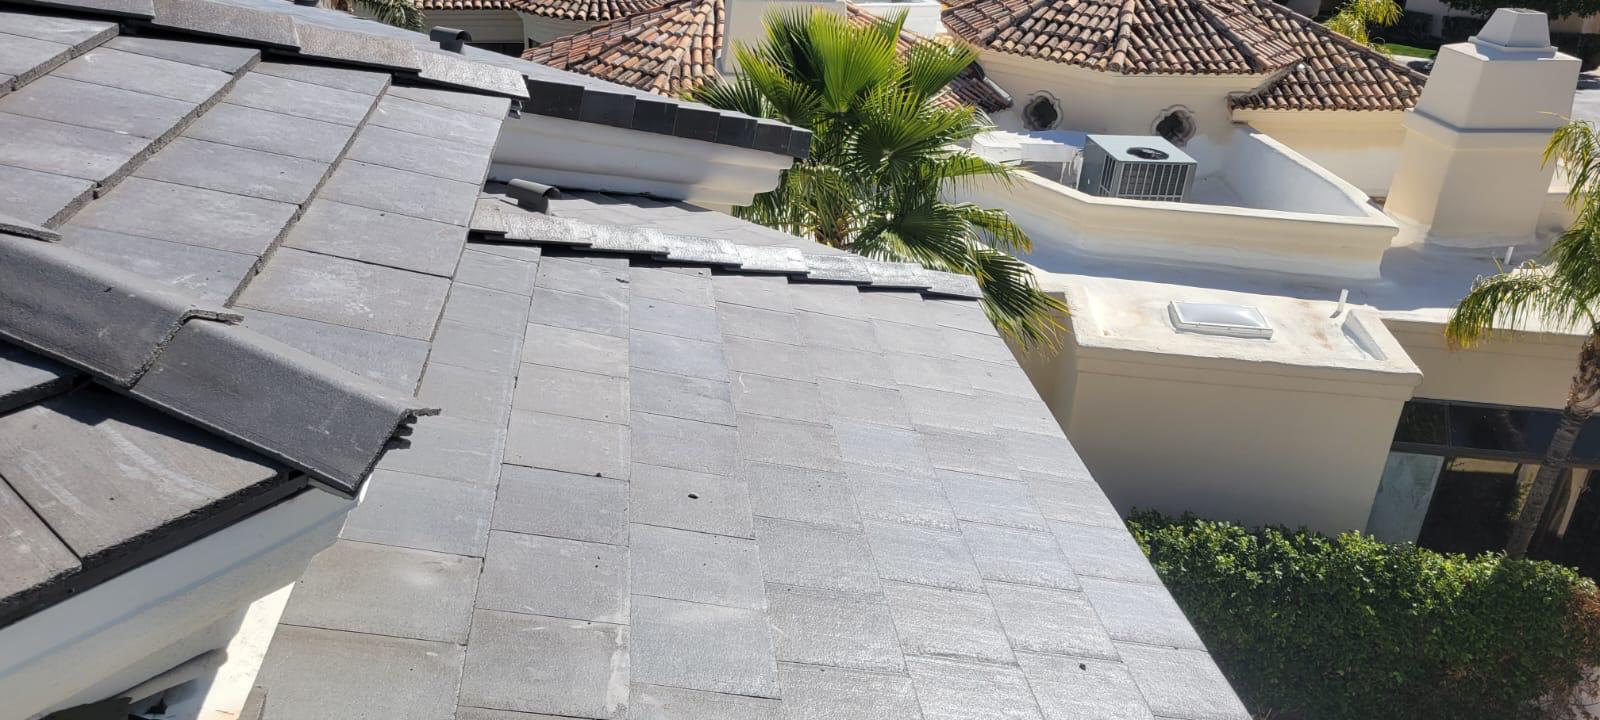 Side-view of newly installed roof tiles in a Chandler home by Behmer.